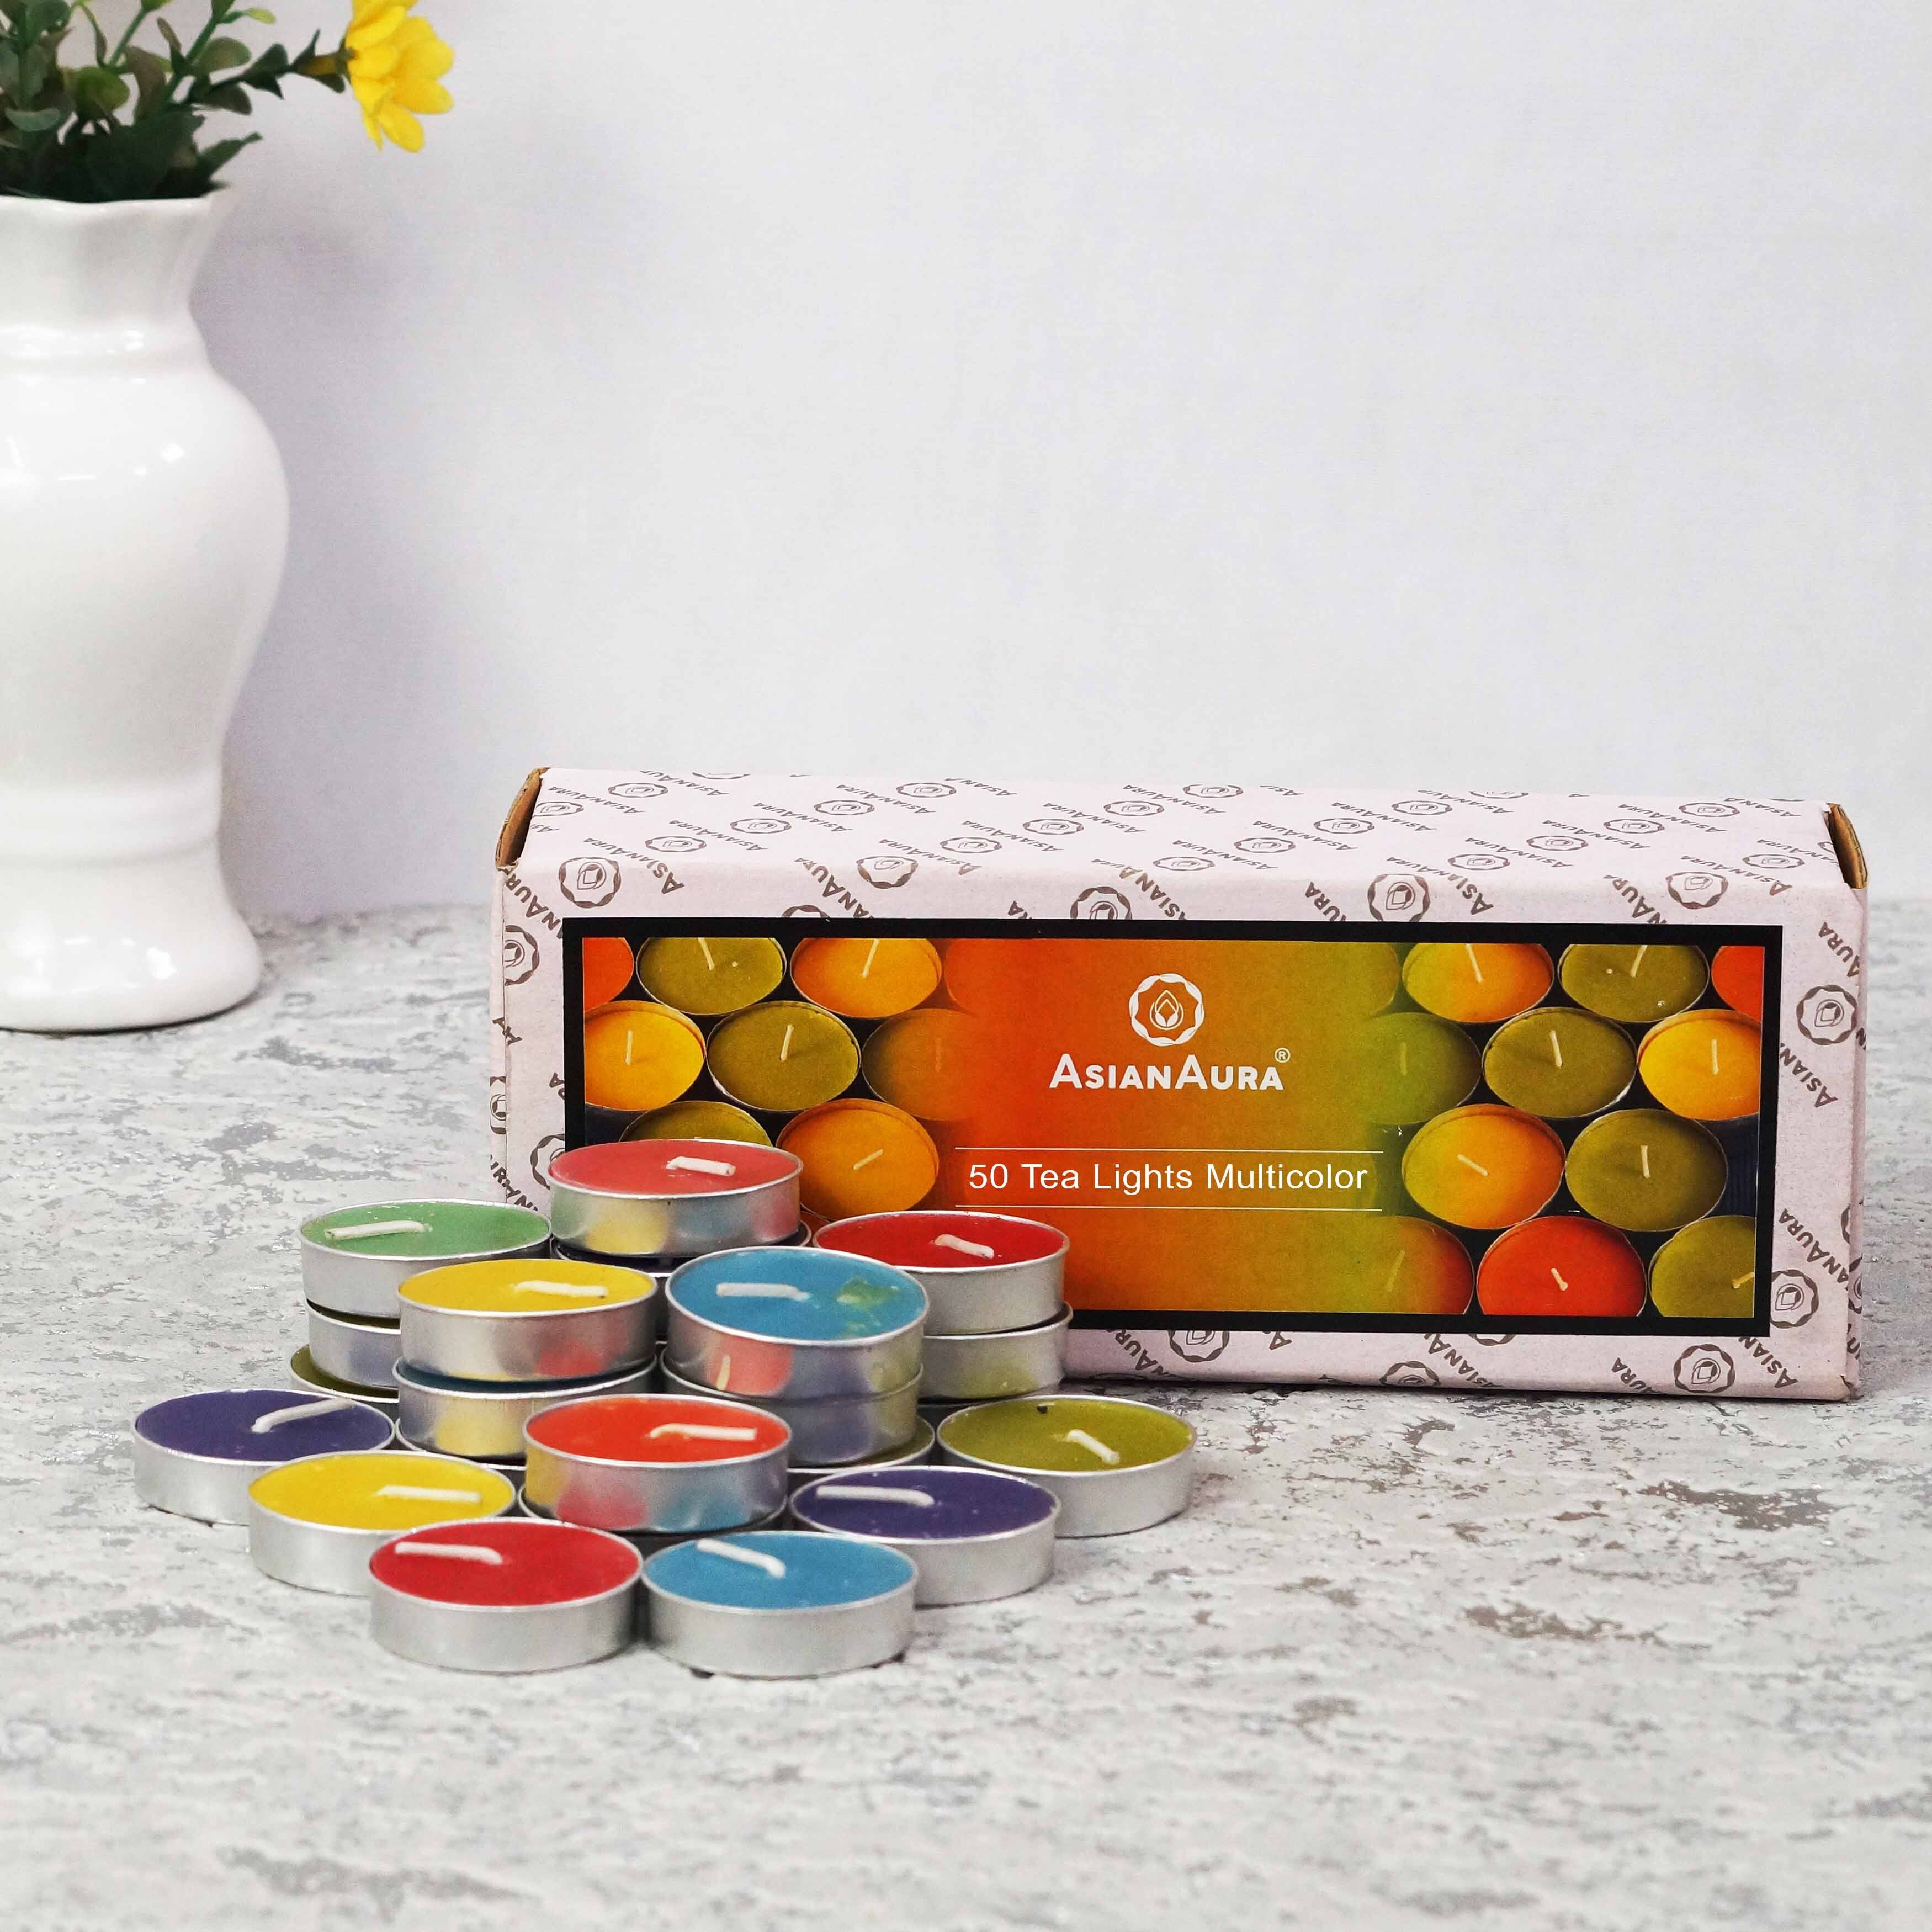 Asian Aura Smokeless T-Light Candles 3-4 Hrs Burning Time Candle Candle Multicolour Pack of 50